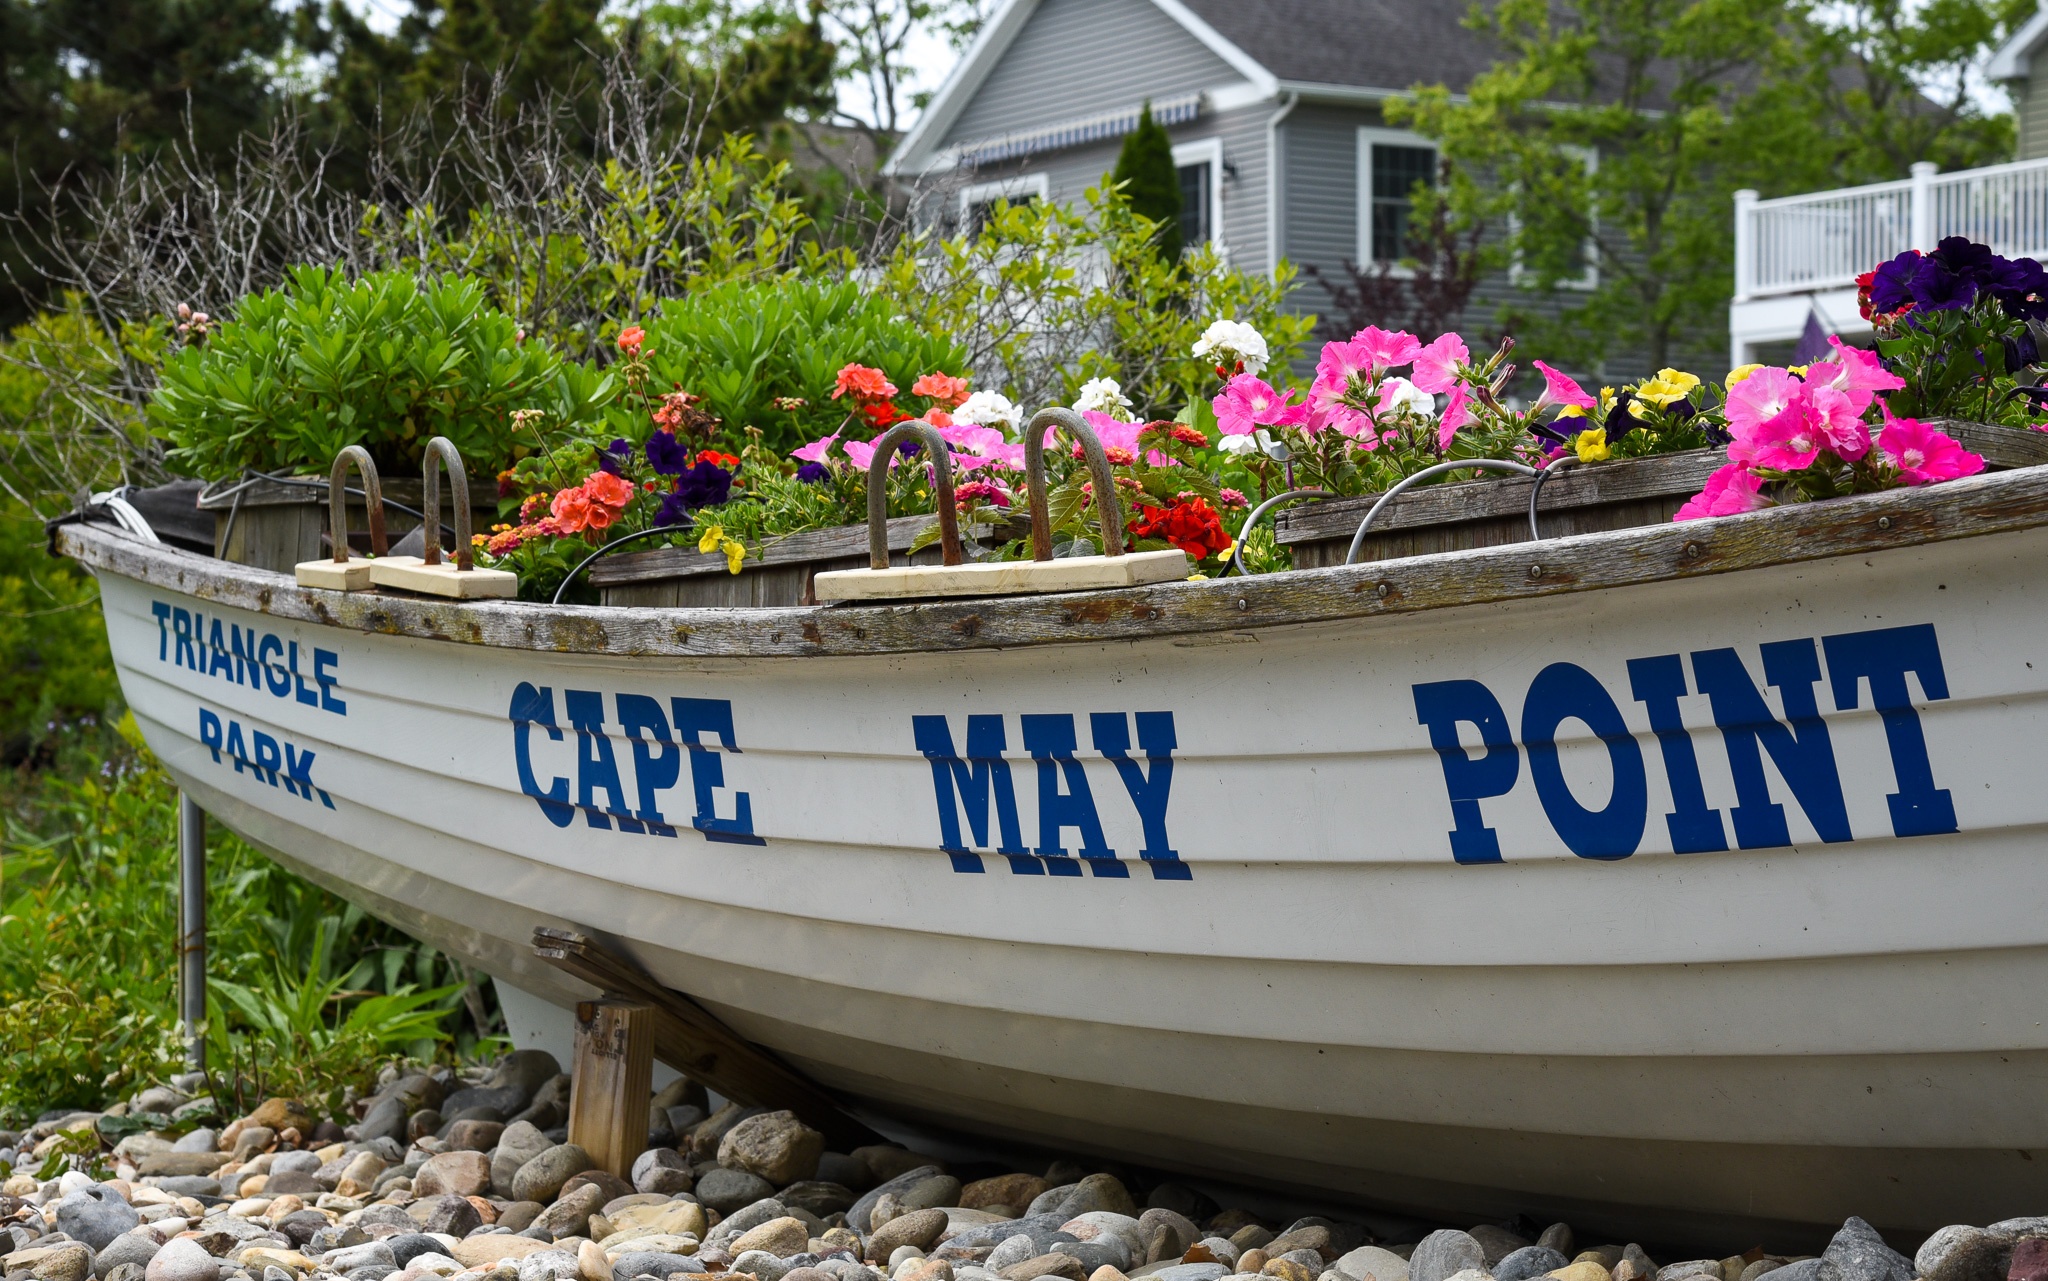 Triangle Park in Cape May Point boat with flowers in it.